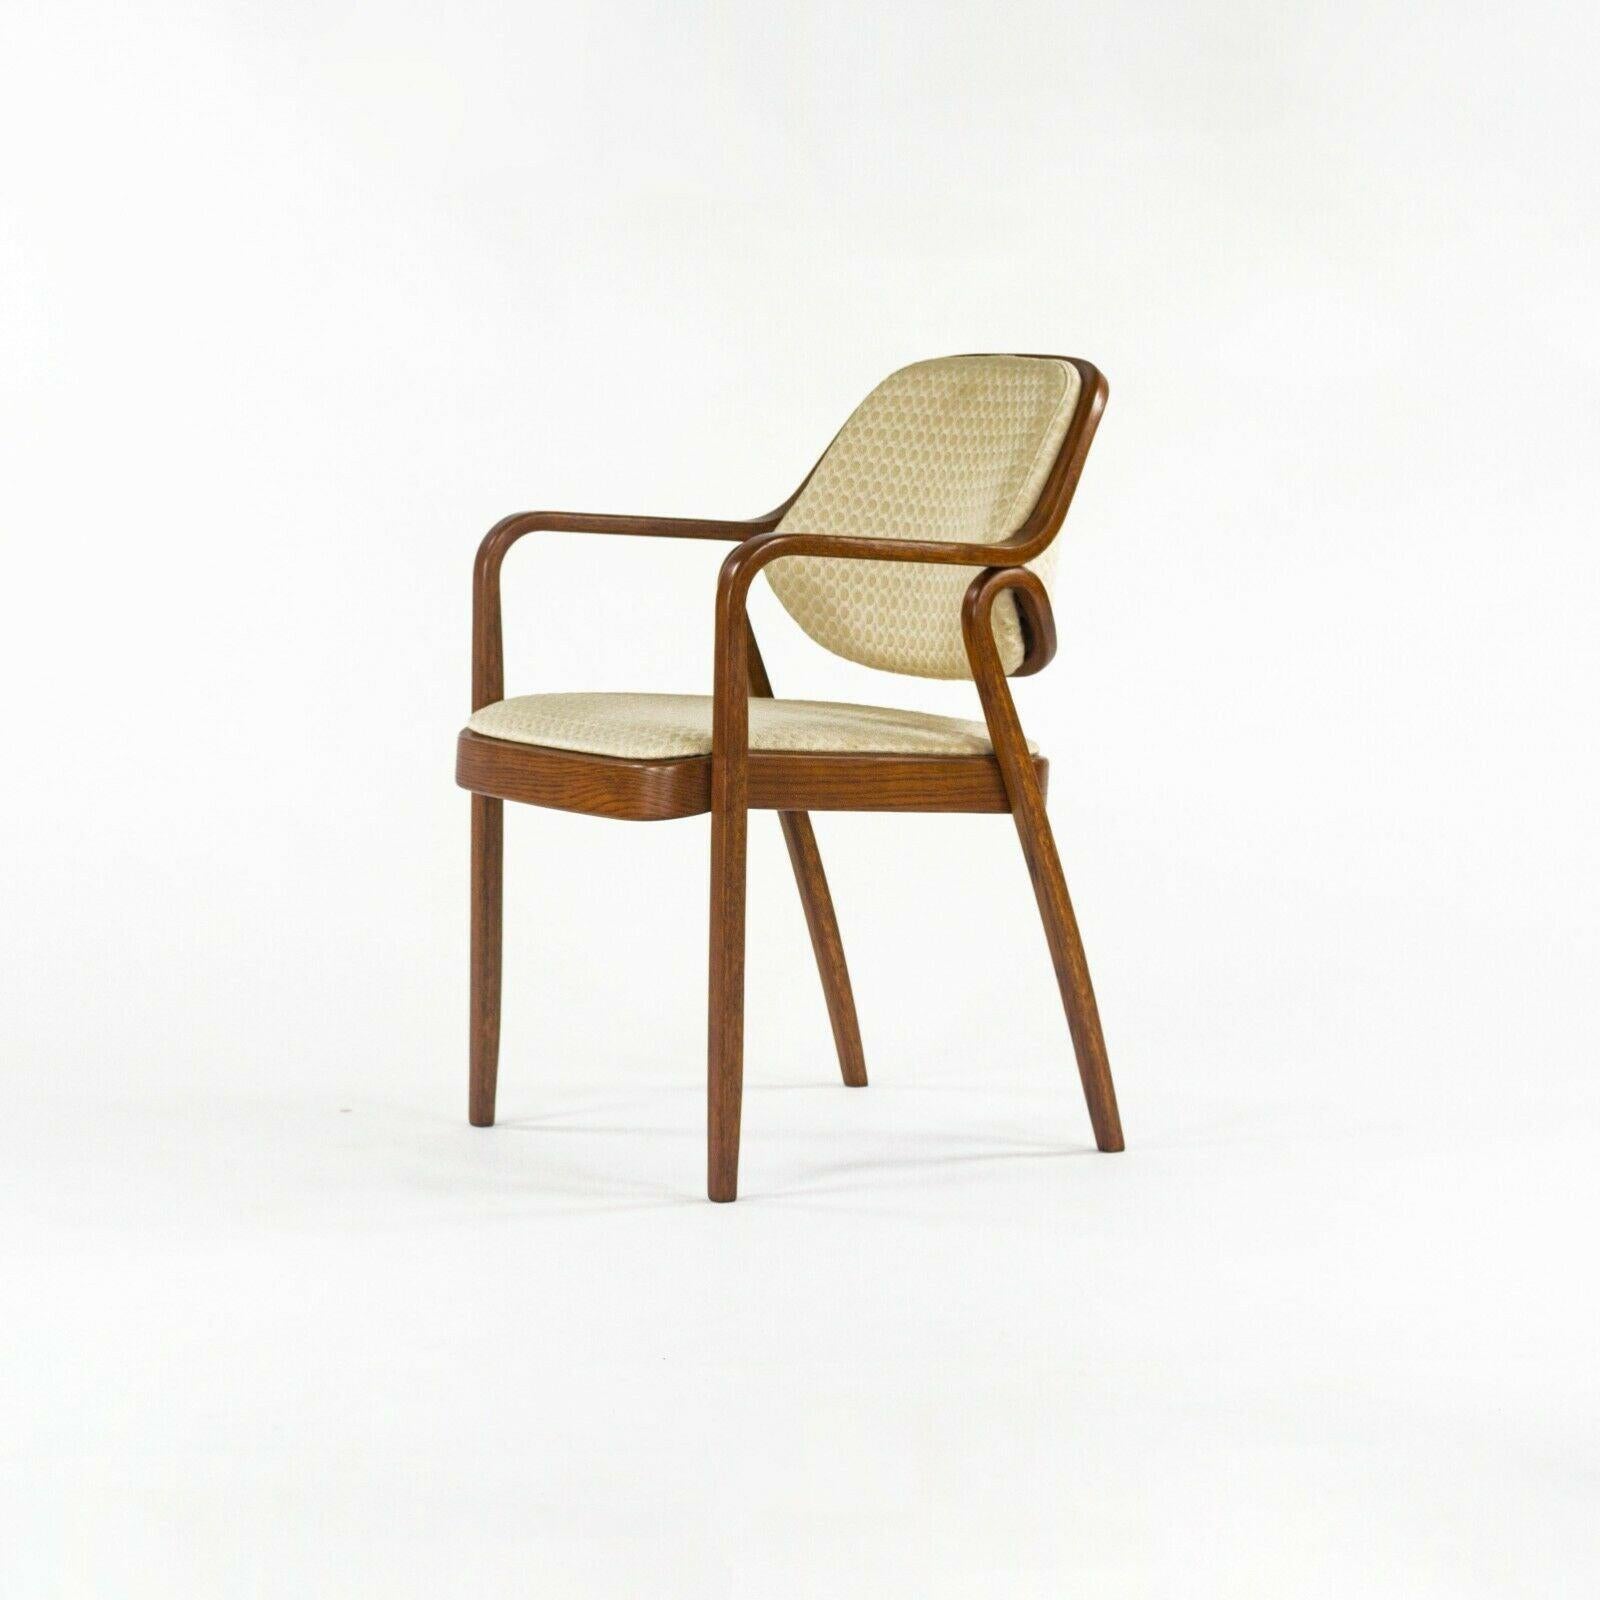 1980s Pair of Don Petitt for Knoll 1105 Bentwood Armchair in Oak with Tan Fabric For Sale 3